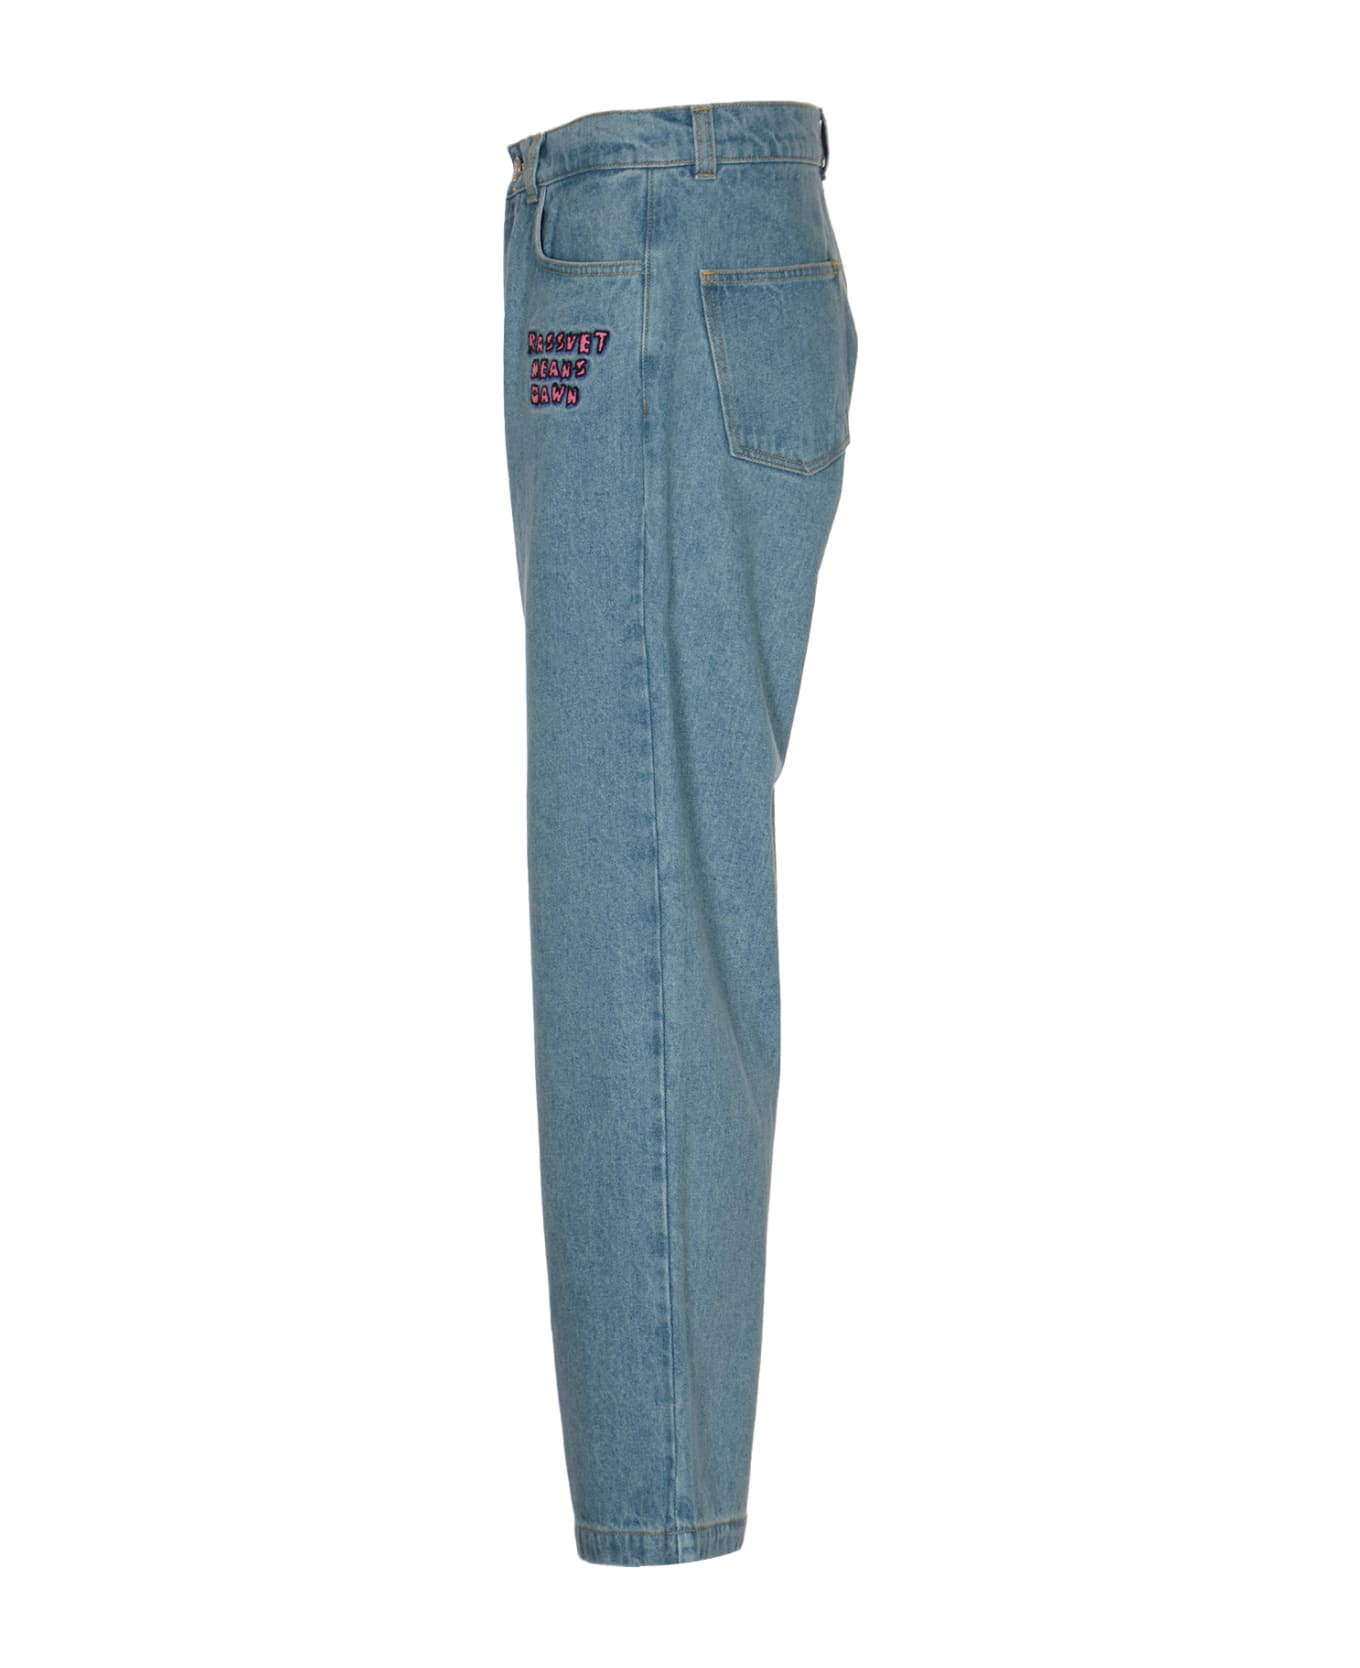 PACCBET Embroidered 5 Pockets Jeans - Light Blue